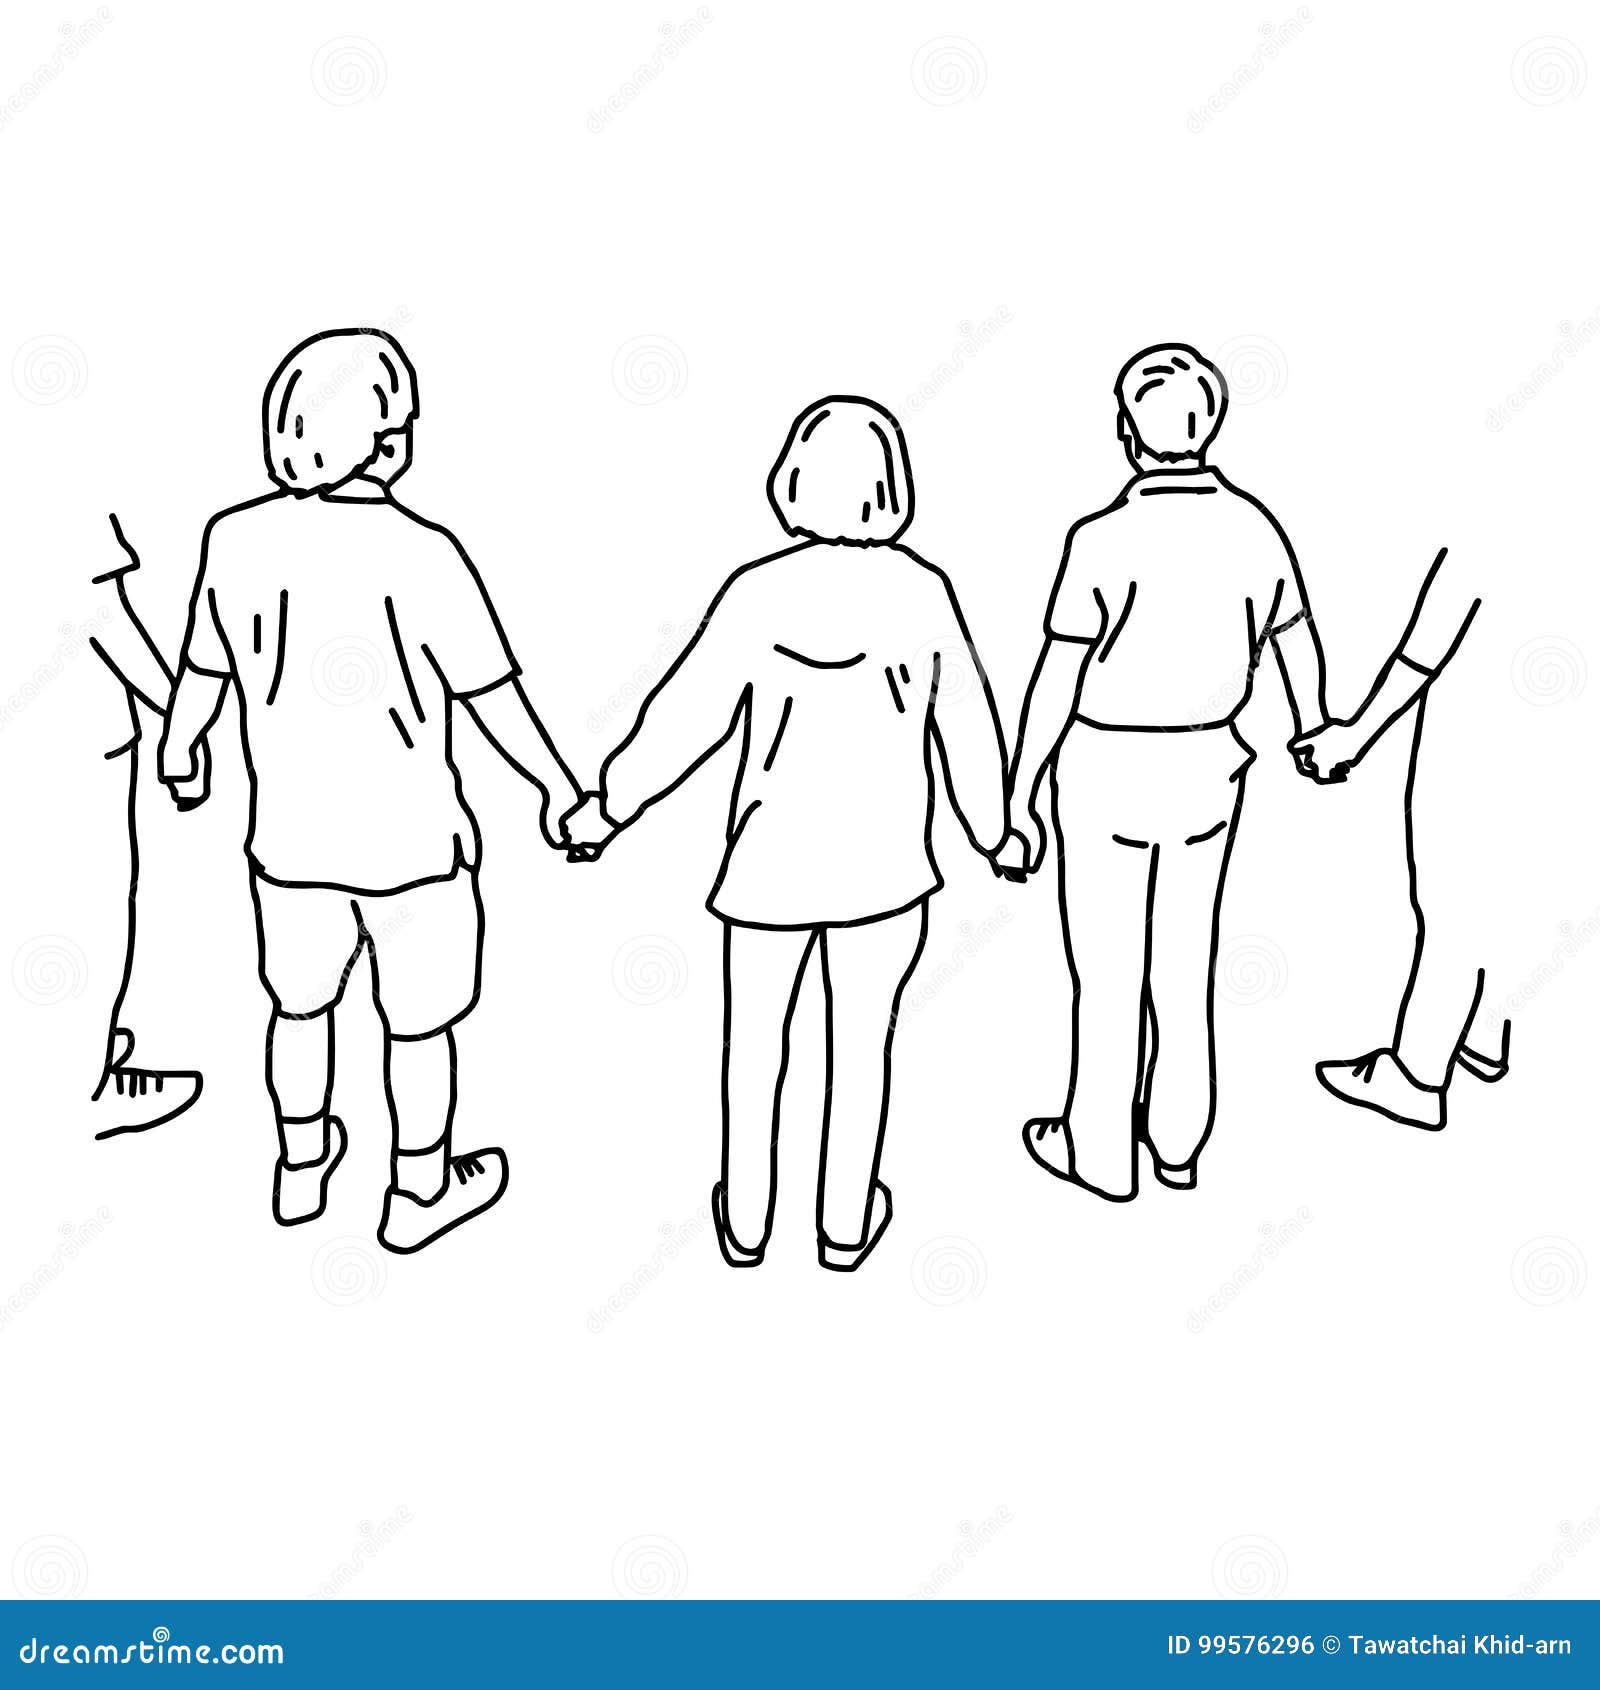 How to Draw Holding Hands with Easy Step by Step Drawing Tutorial | How to  Draw Step by Step Drawing Tutorials